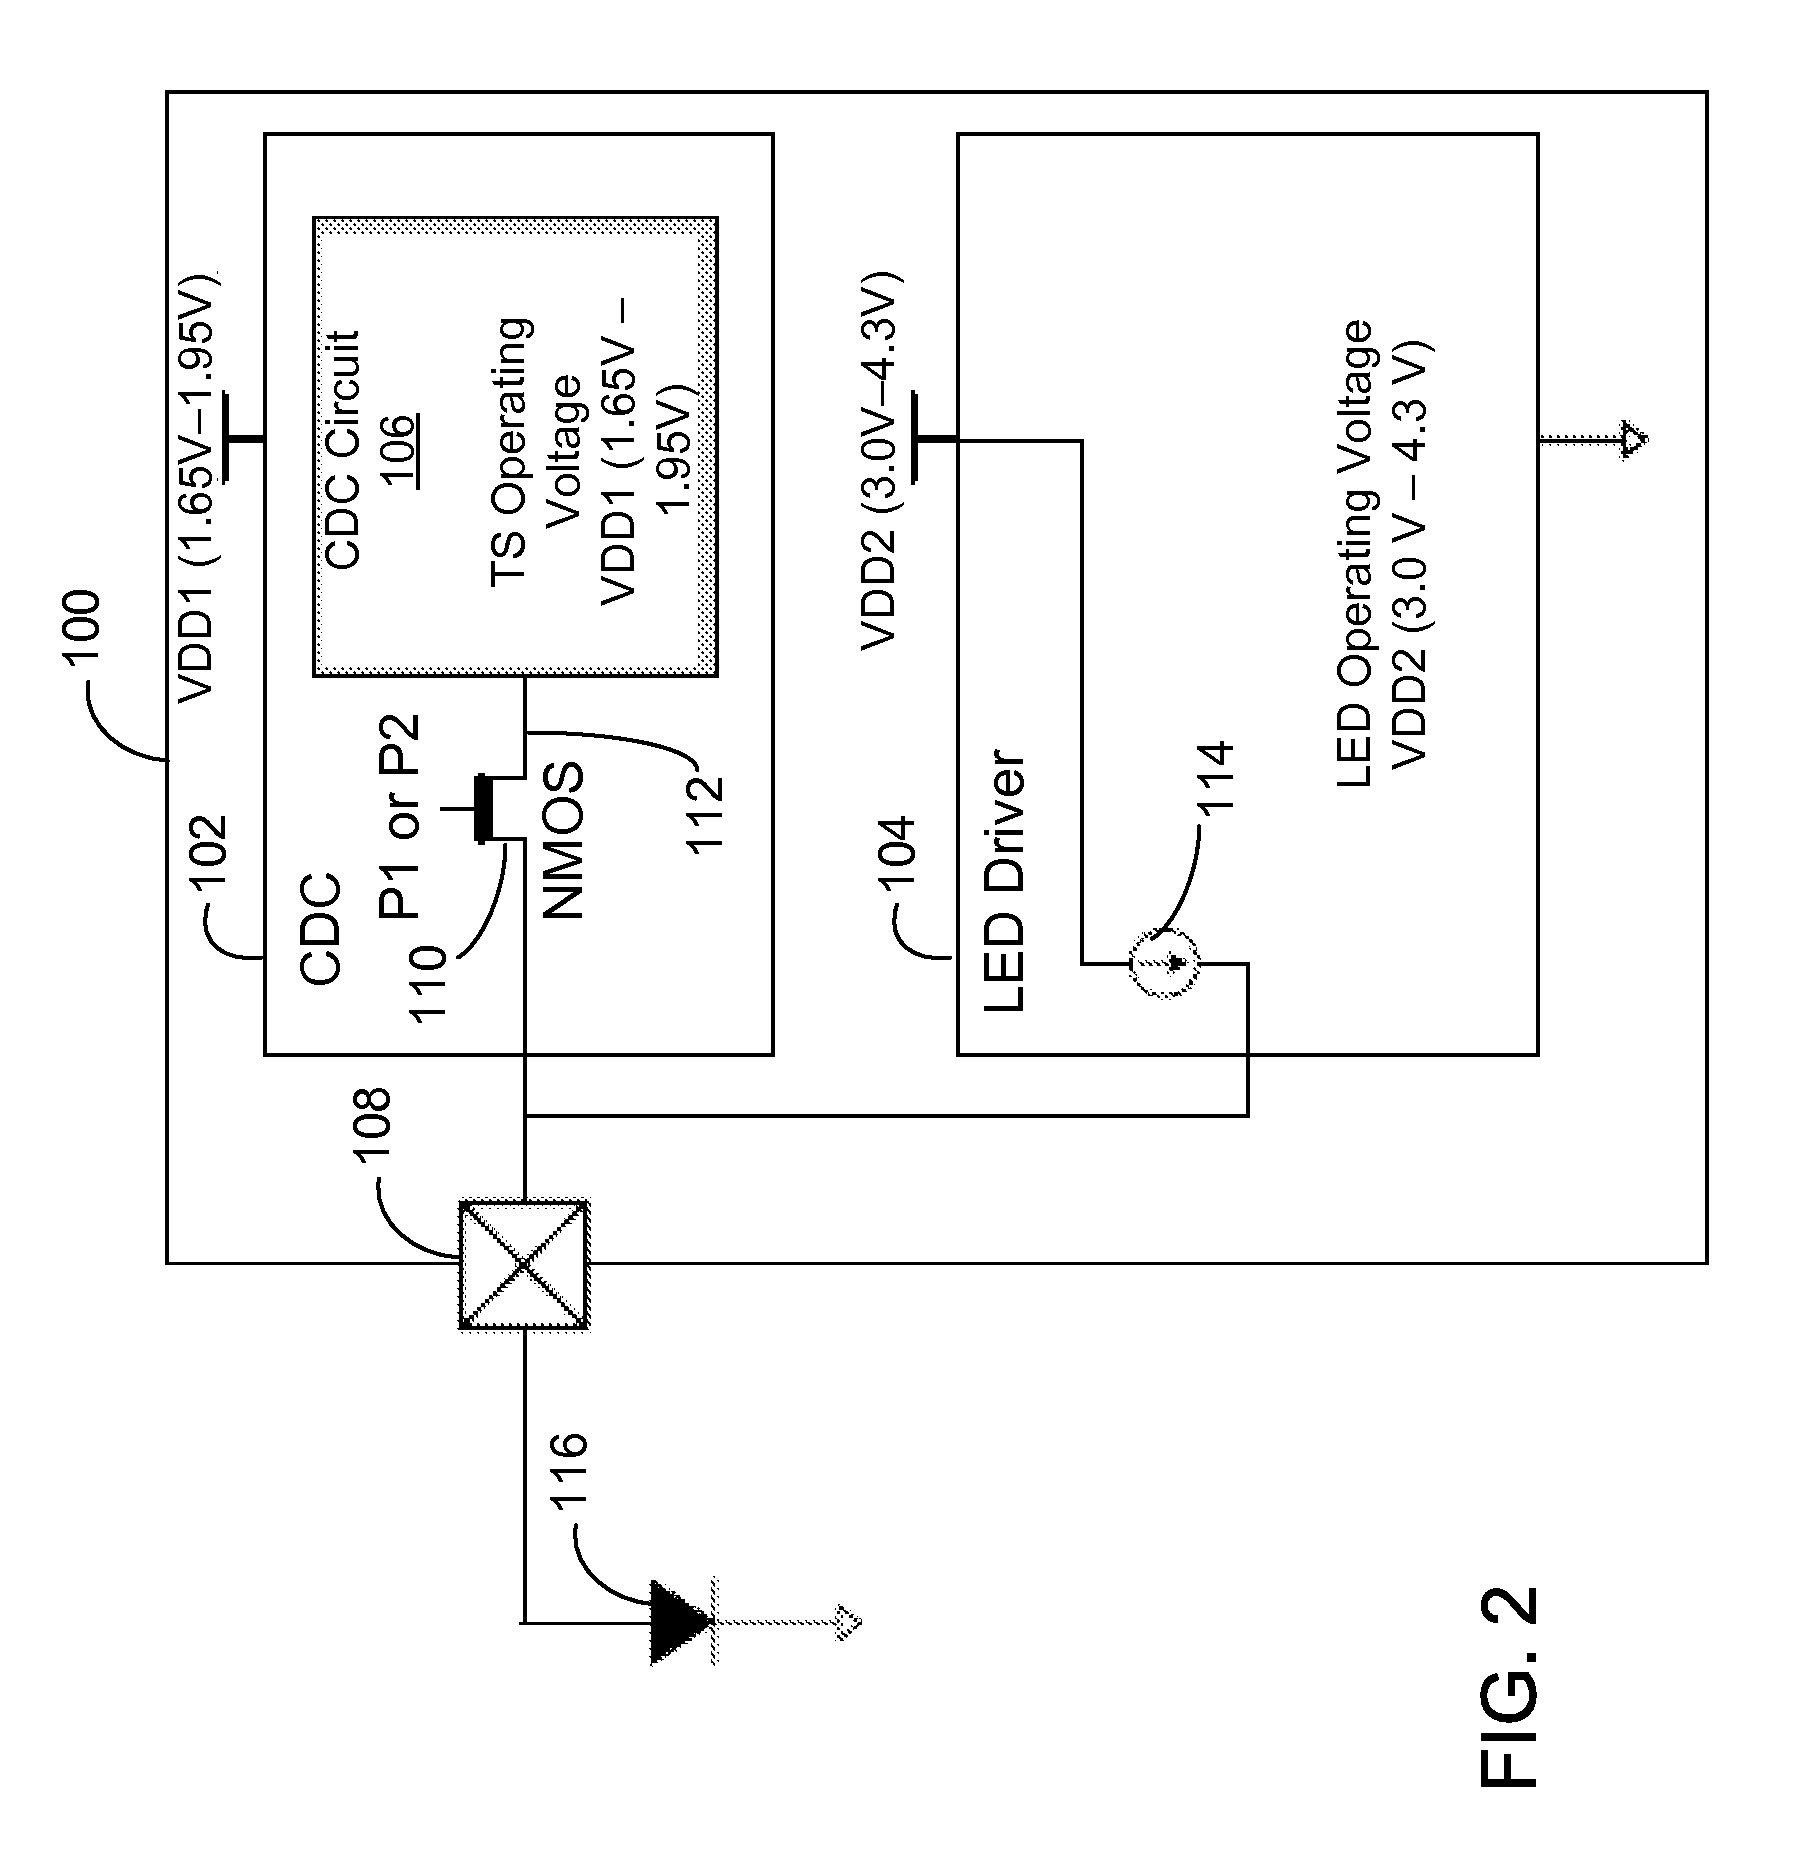 Combined touch sensor and LED driver with n-type mosfet protecting touch sensor